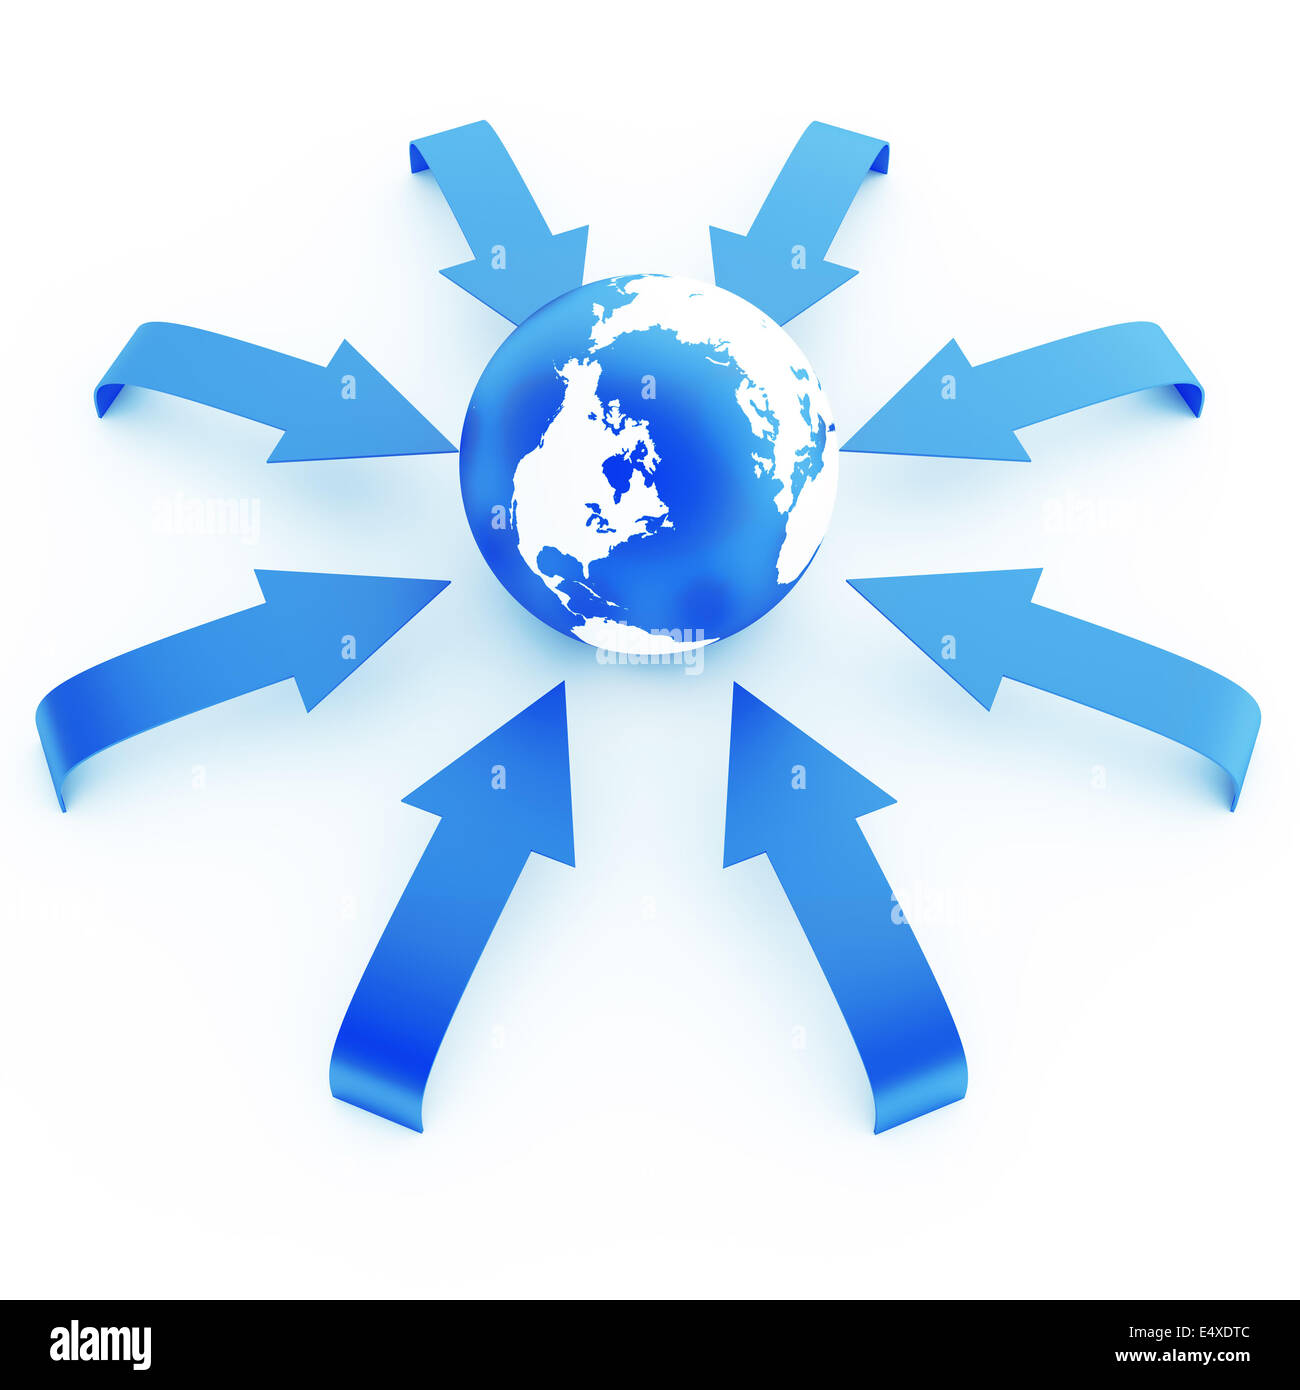 earth in an environment of blue arrows Stock Photo